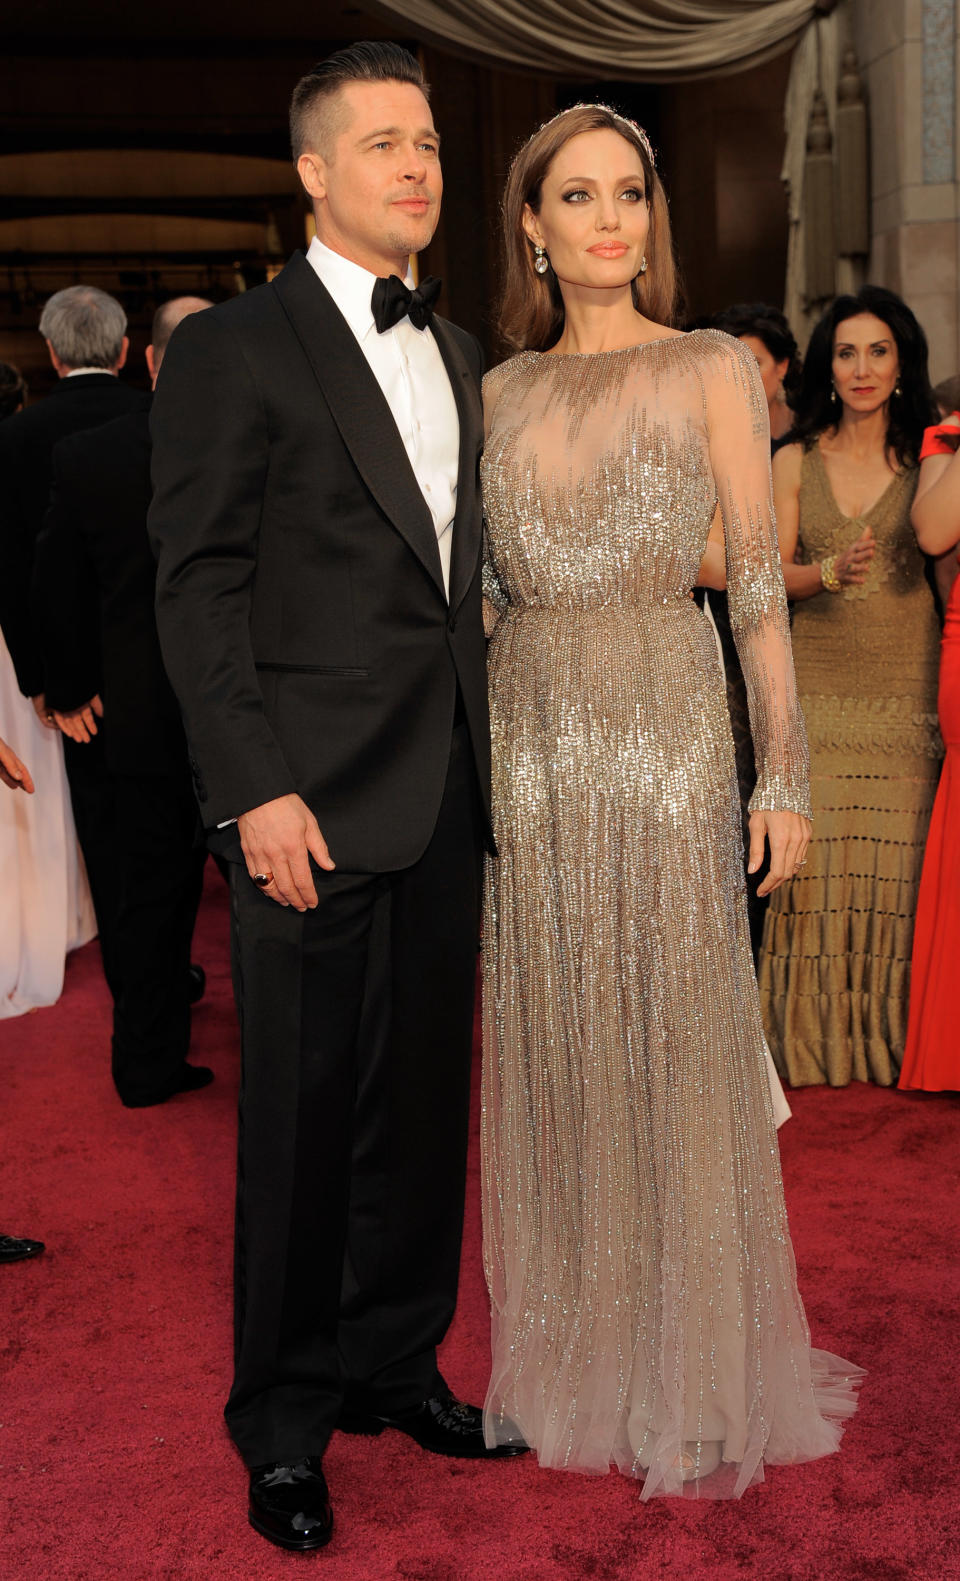 Brad Pitt, left, and Angelina Jolie arrive at the Oscars on Sunday, March 2, 2014, at the Dolby Theatre in Los Angeles. (Photo by Chris Pizzello/Invision/AP)